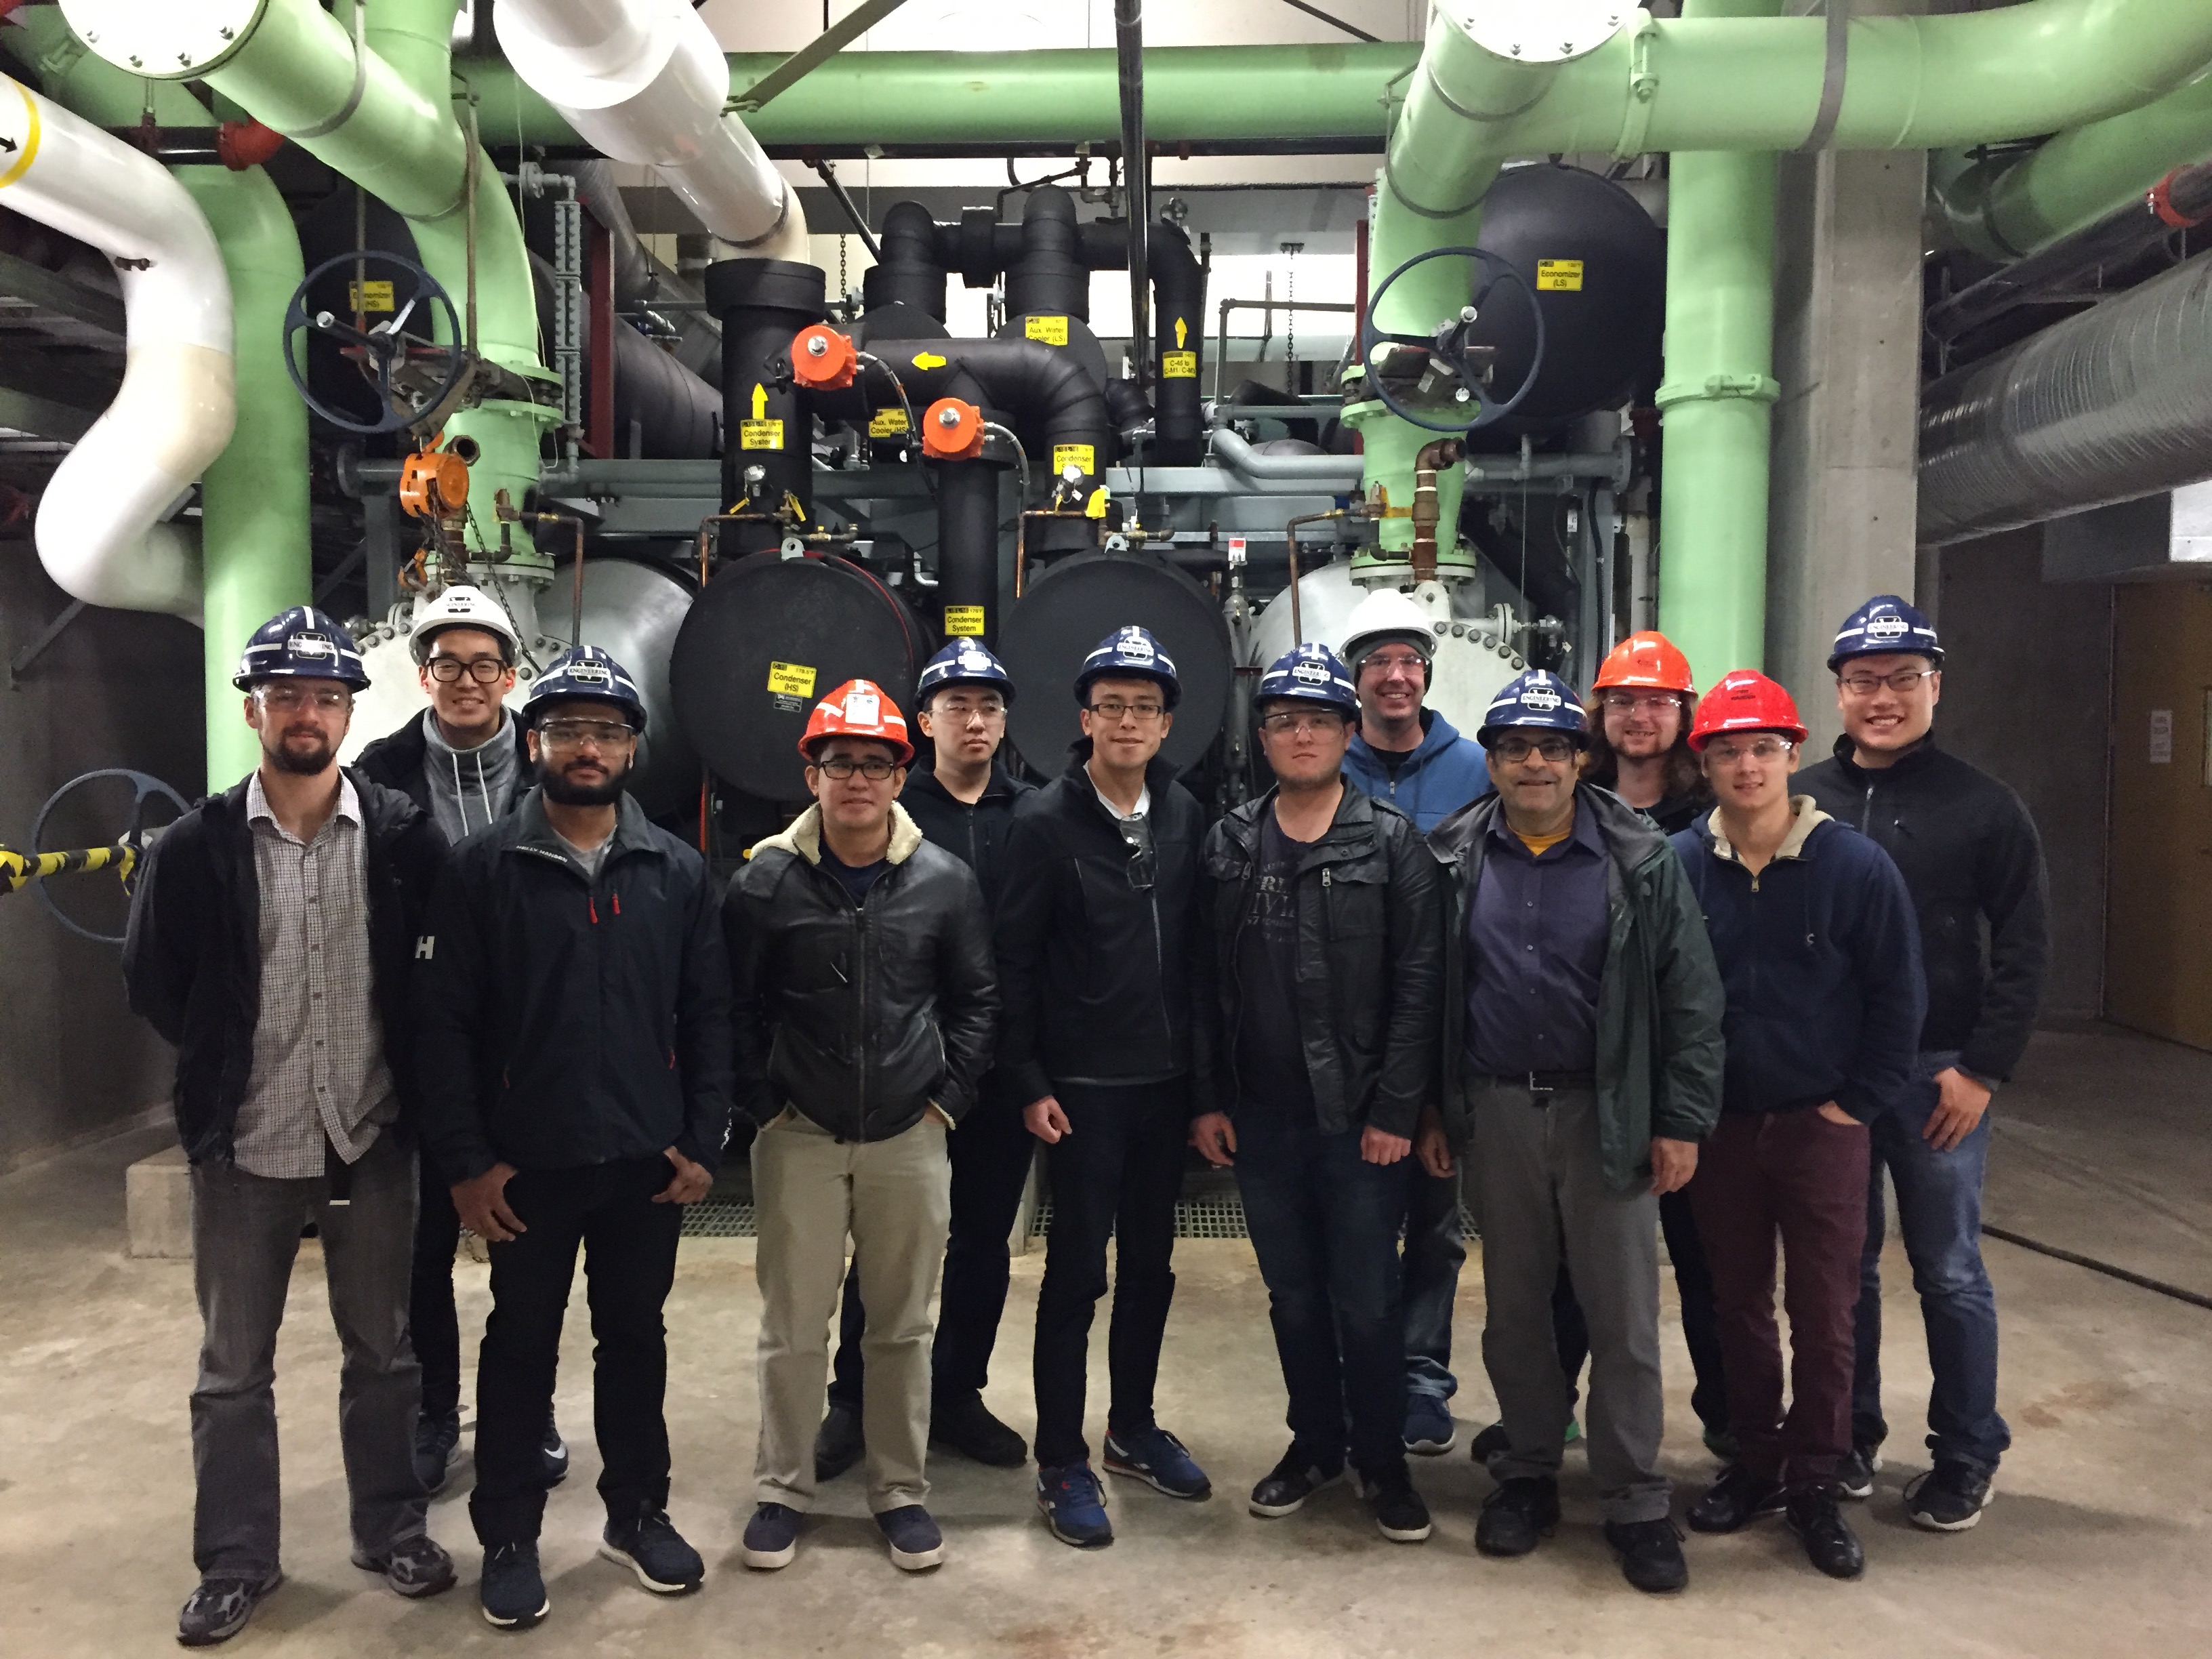 Class trip to Vancouver Waste to Energy Facility, Fall 2016